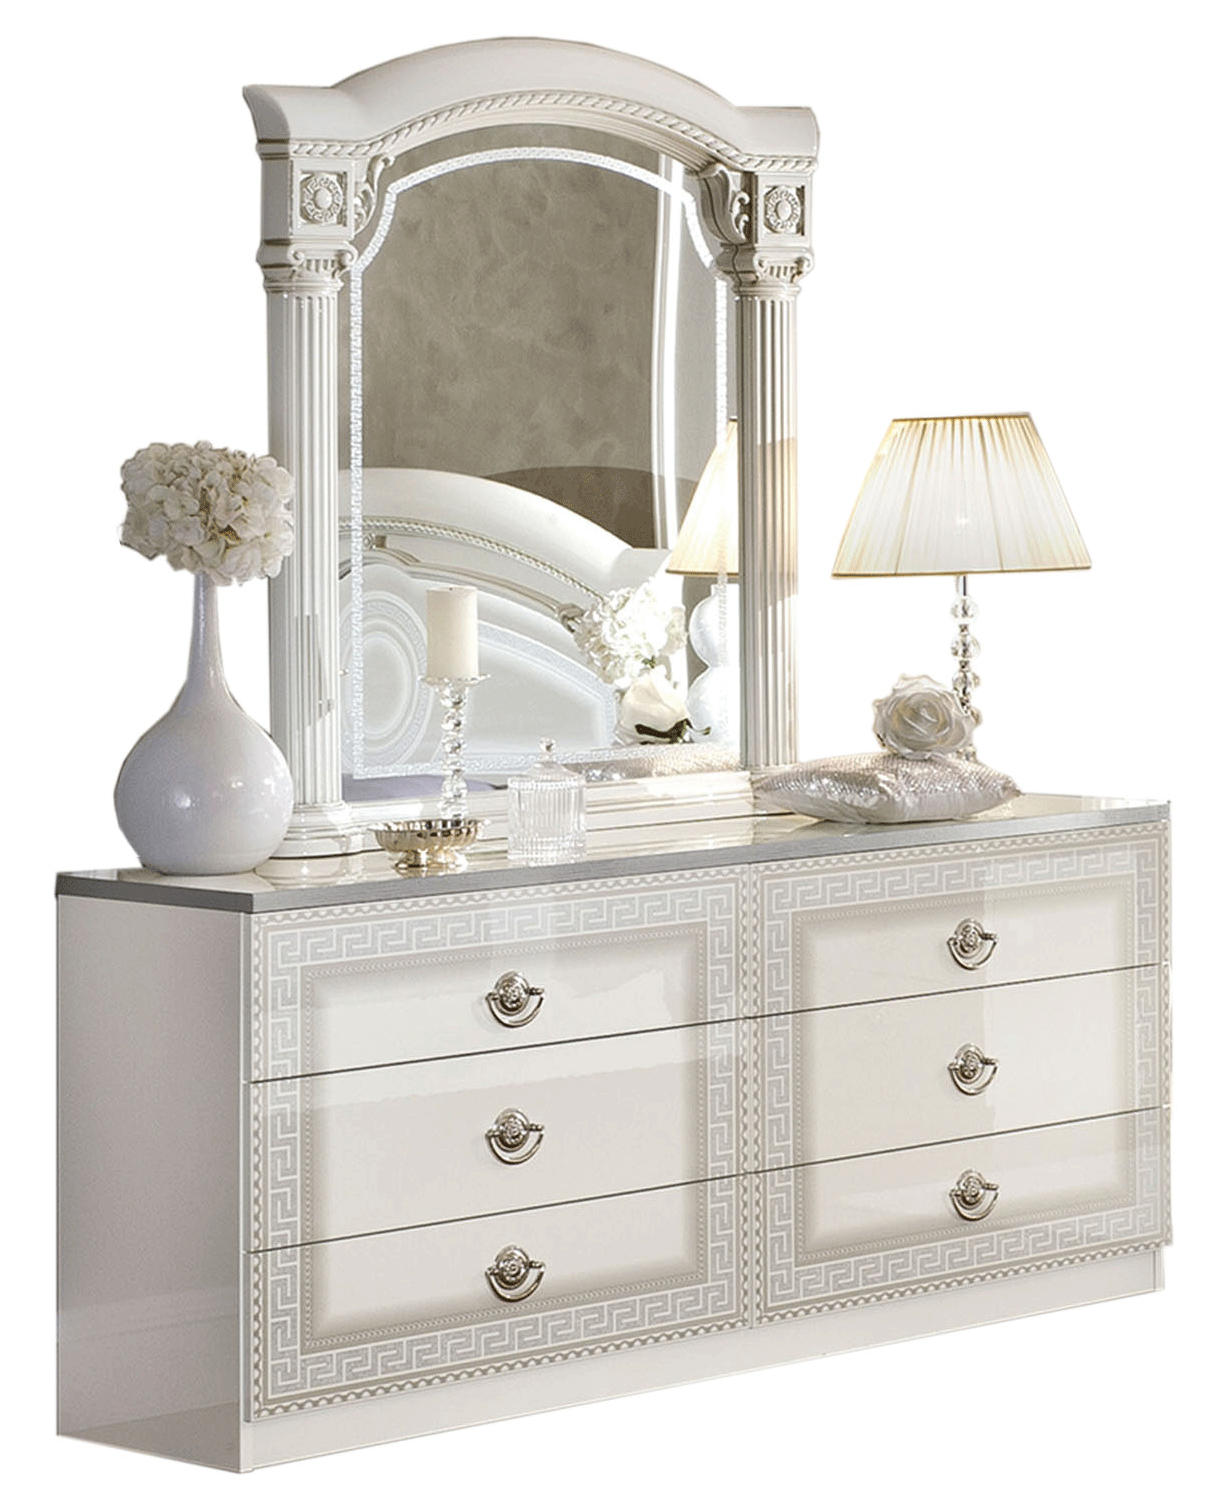 Brands Arredoclassic Bedroom, Italy Aida White Silver Dresser